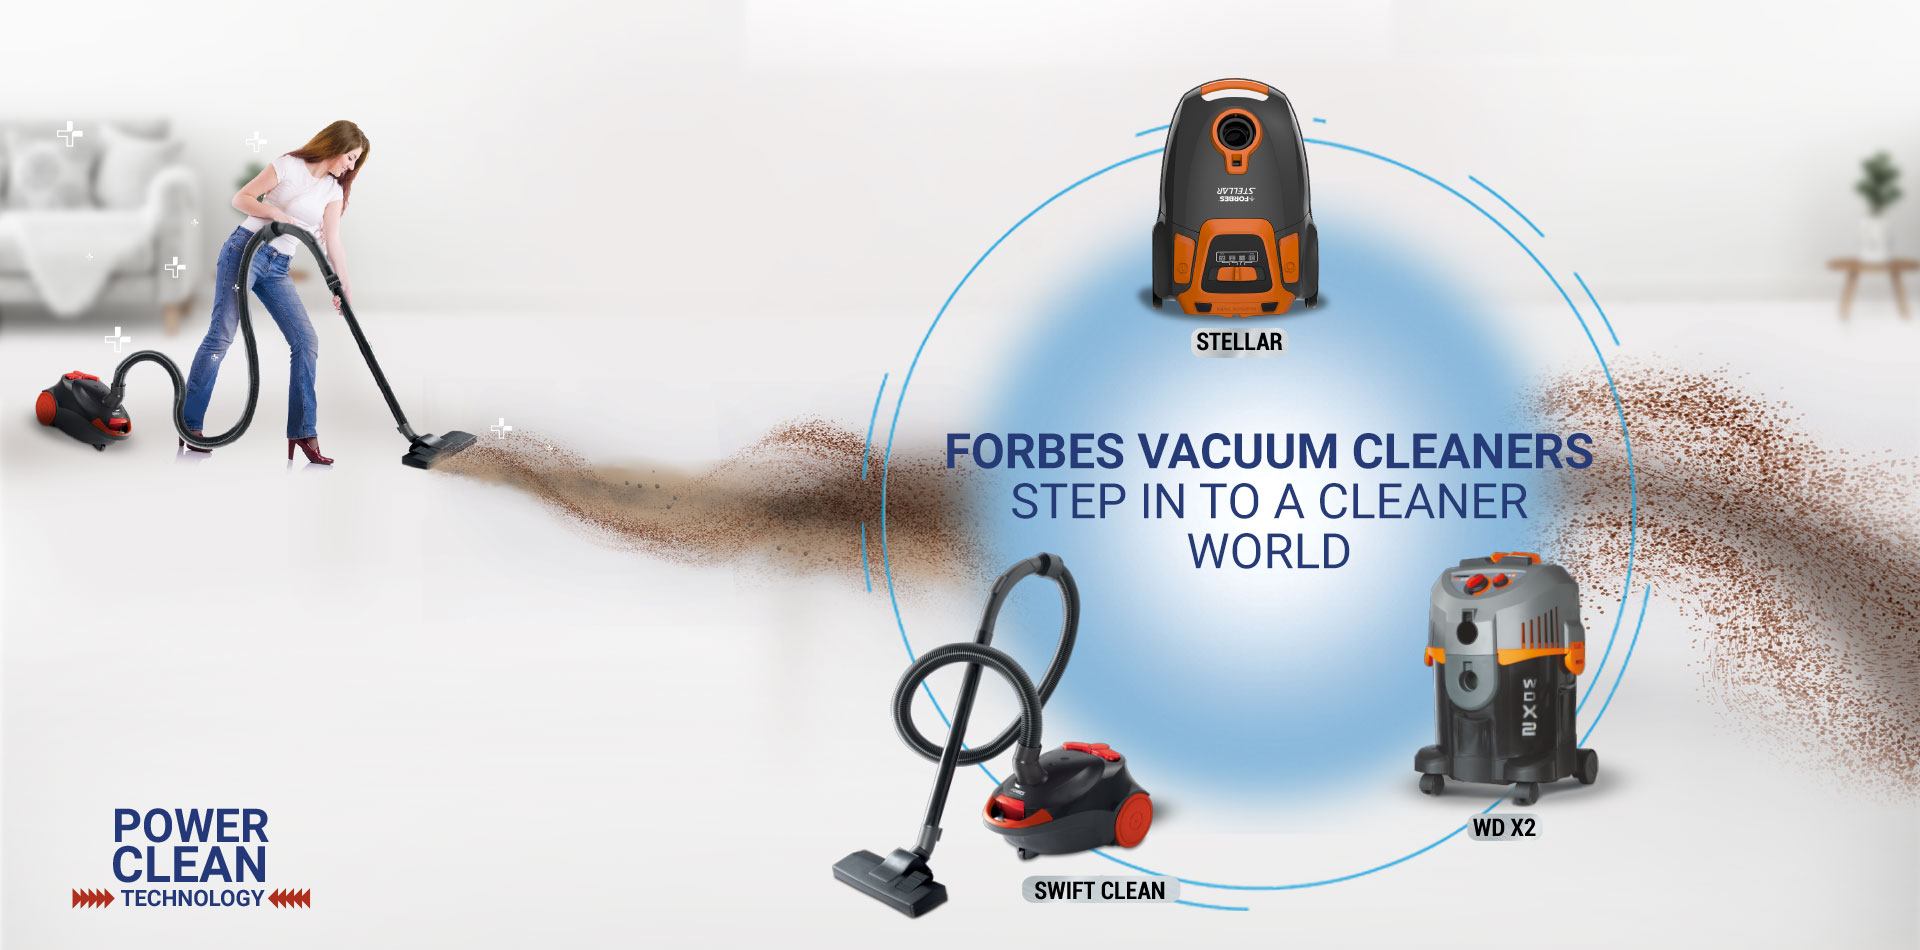 FORBES VACUUM CLEANERS STEP IN TO A CLEANER WORLD